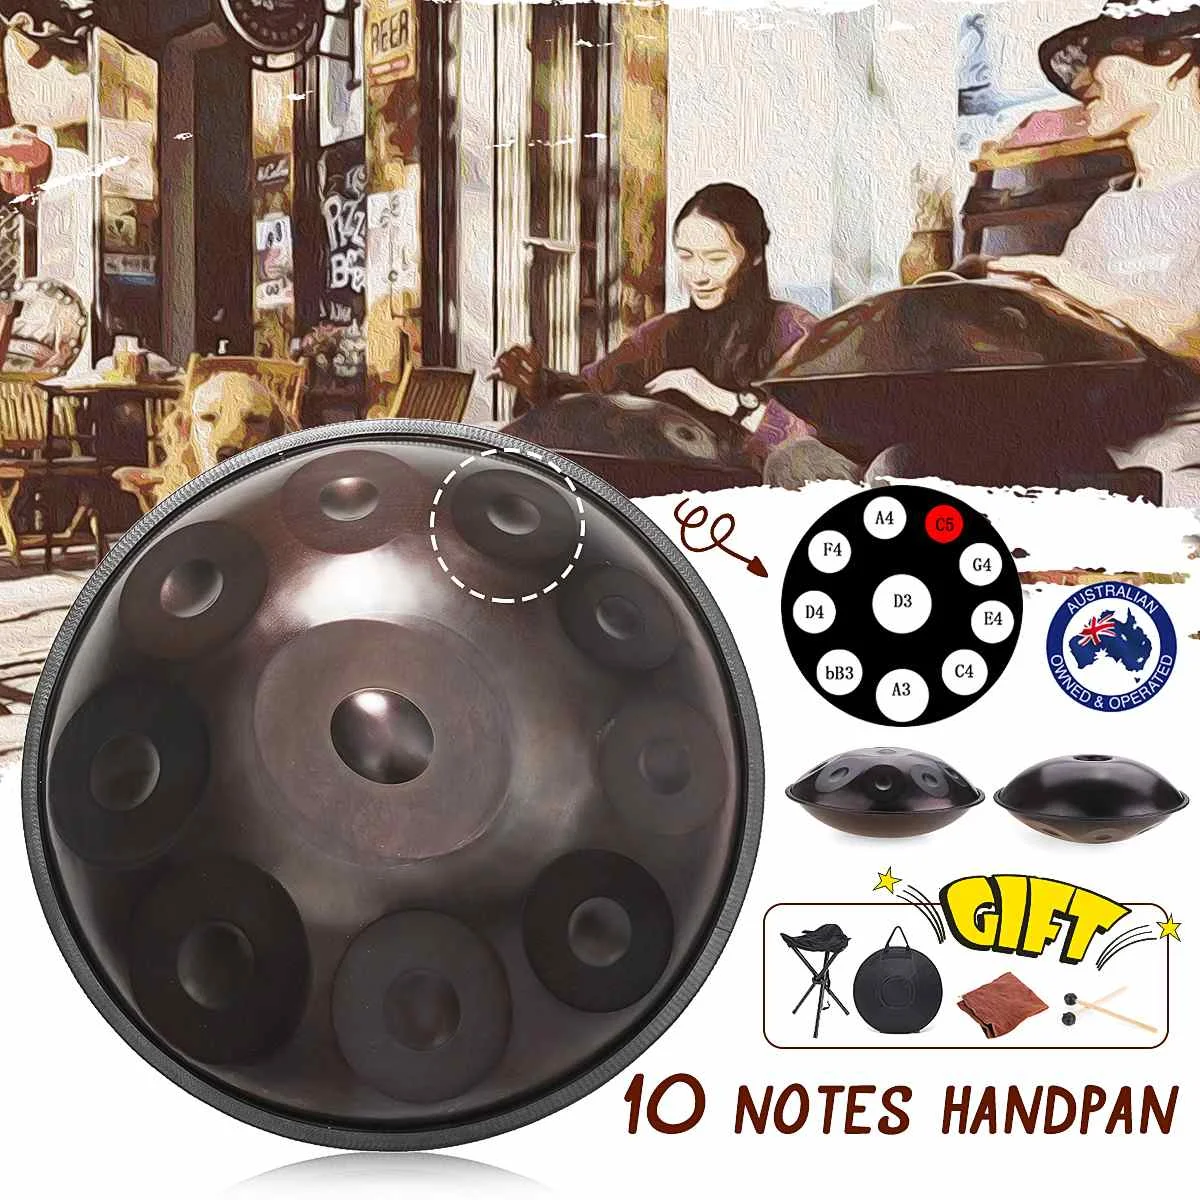 

10 Notes Carbon Steel Handpan drums Handmade Handrum Antique F major D Minor Hand Drum Percussion Musical Instruments Gifts